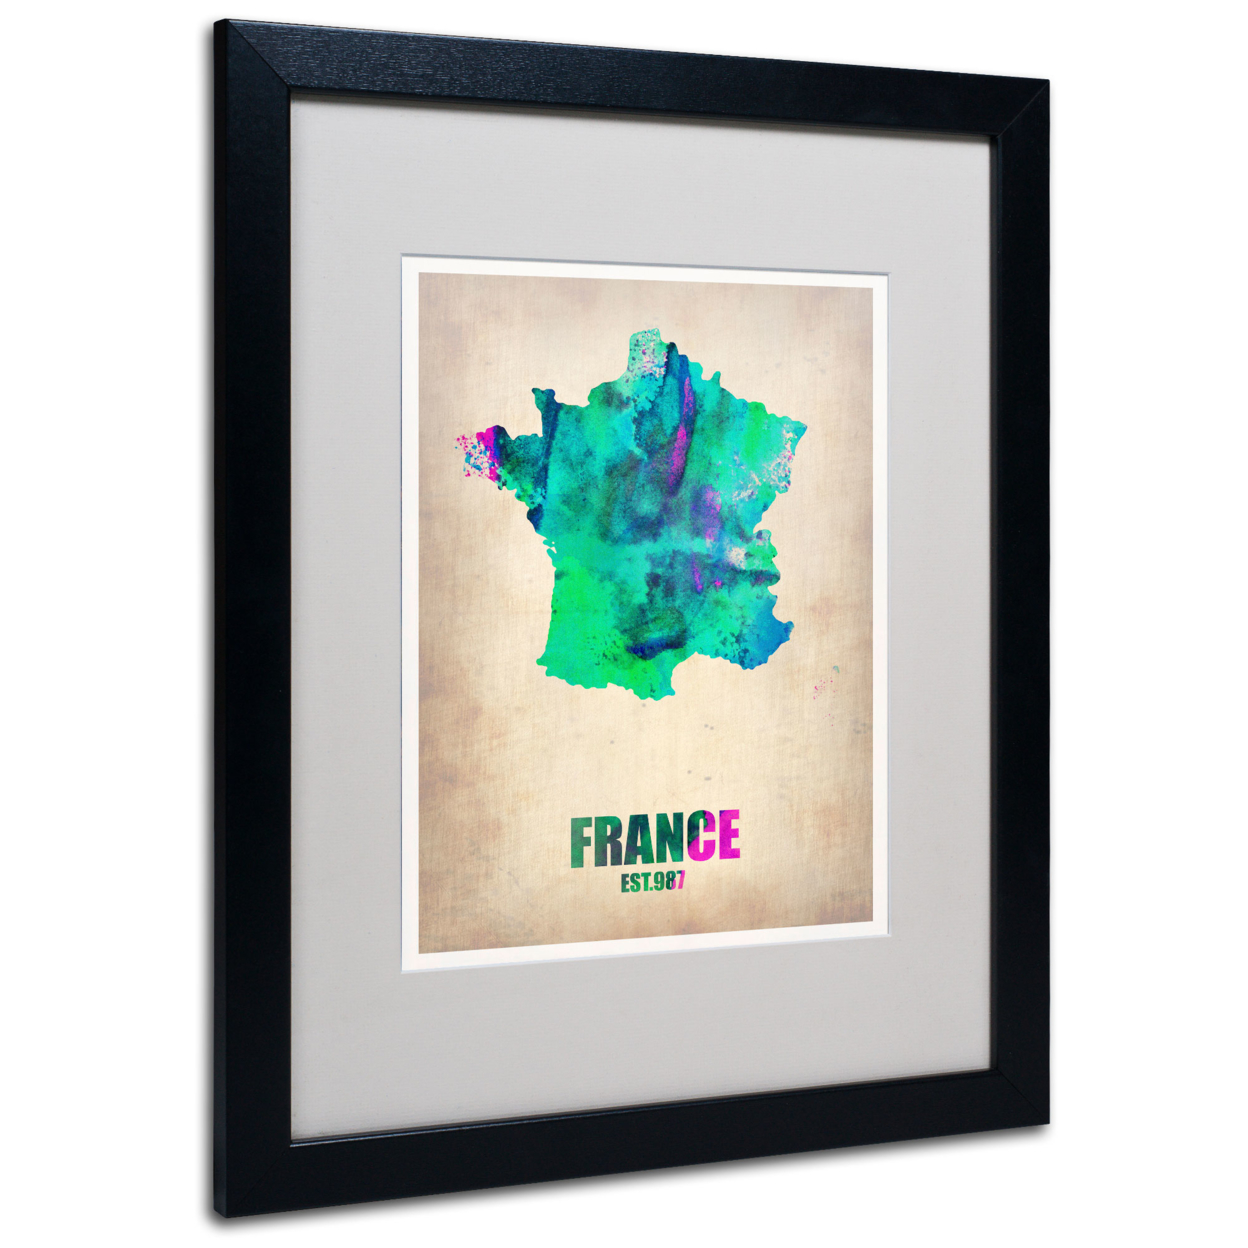 Naxart 'France Watercolor Map' Black Wooden Framed Art 18 X 22 Inches